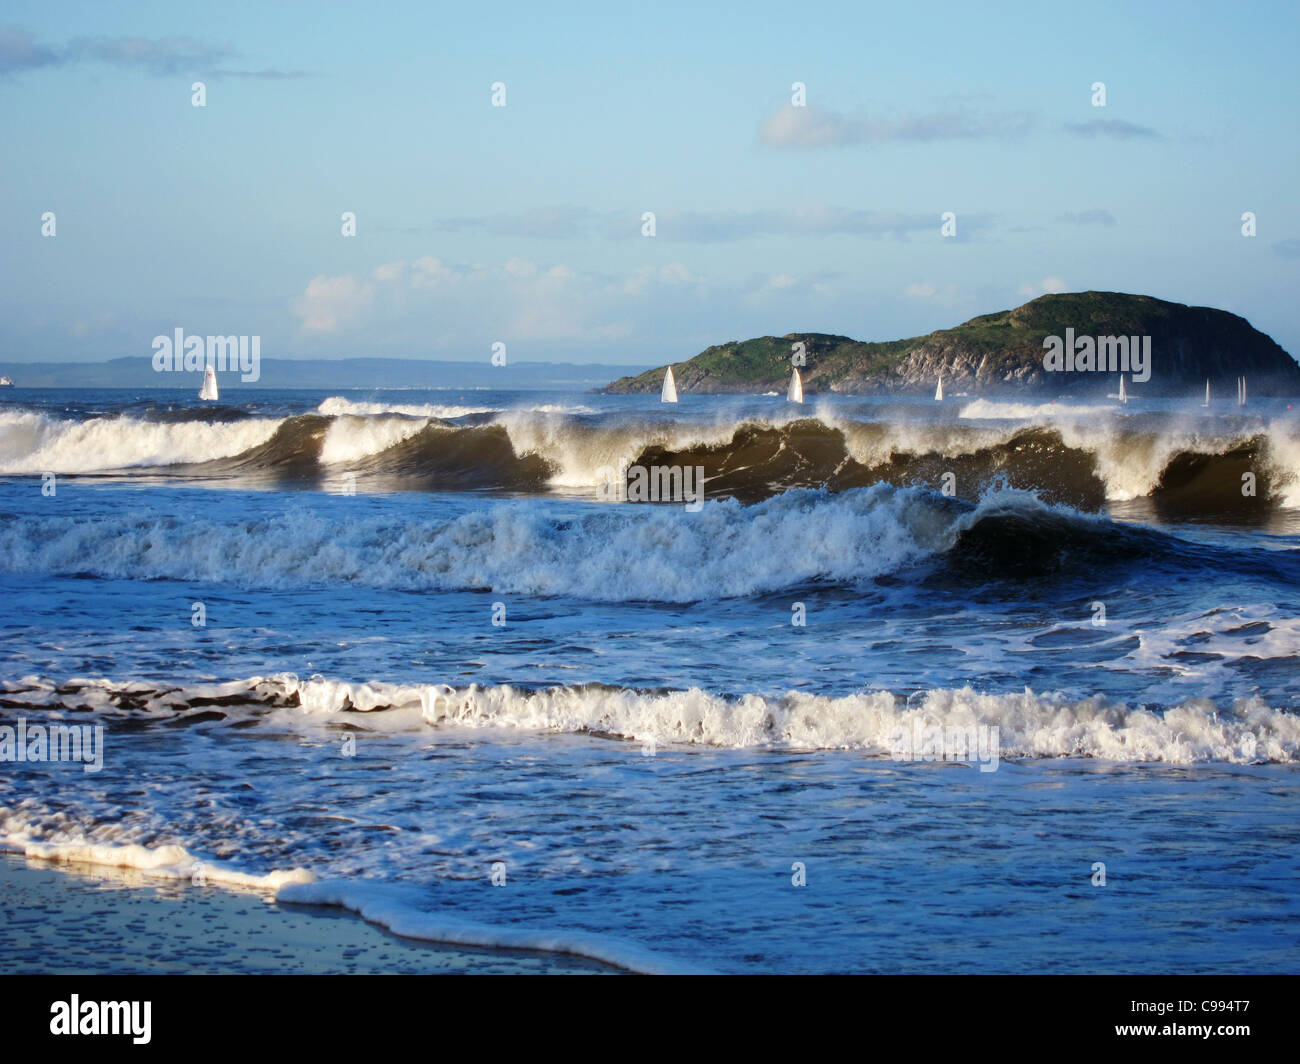 Crashing waves on the coast at North Berwick, Scotland in November. Craigleith Island is in the background. Stock Photo